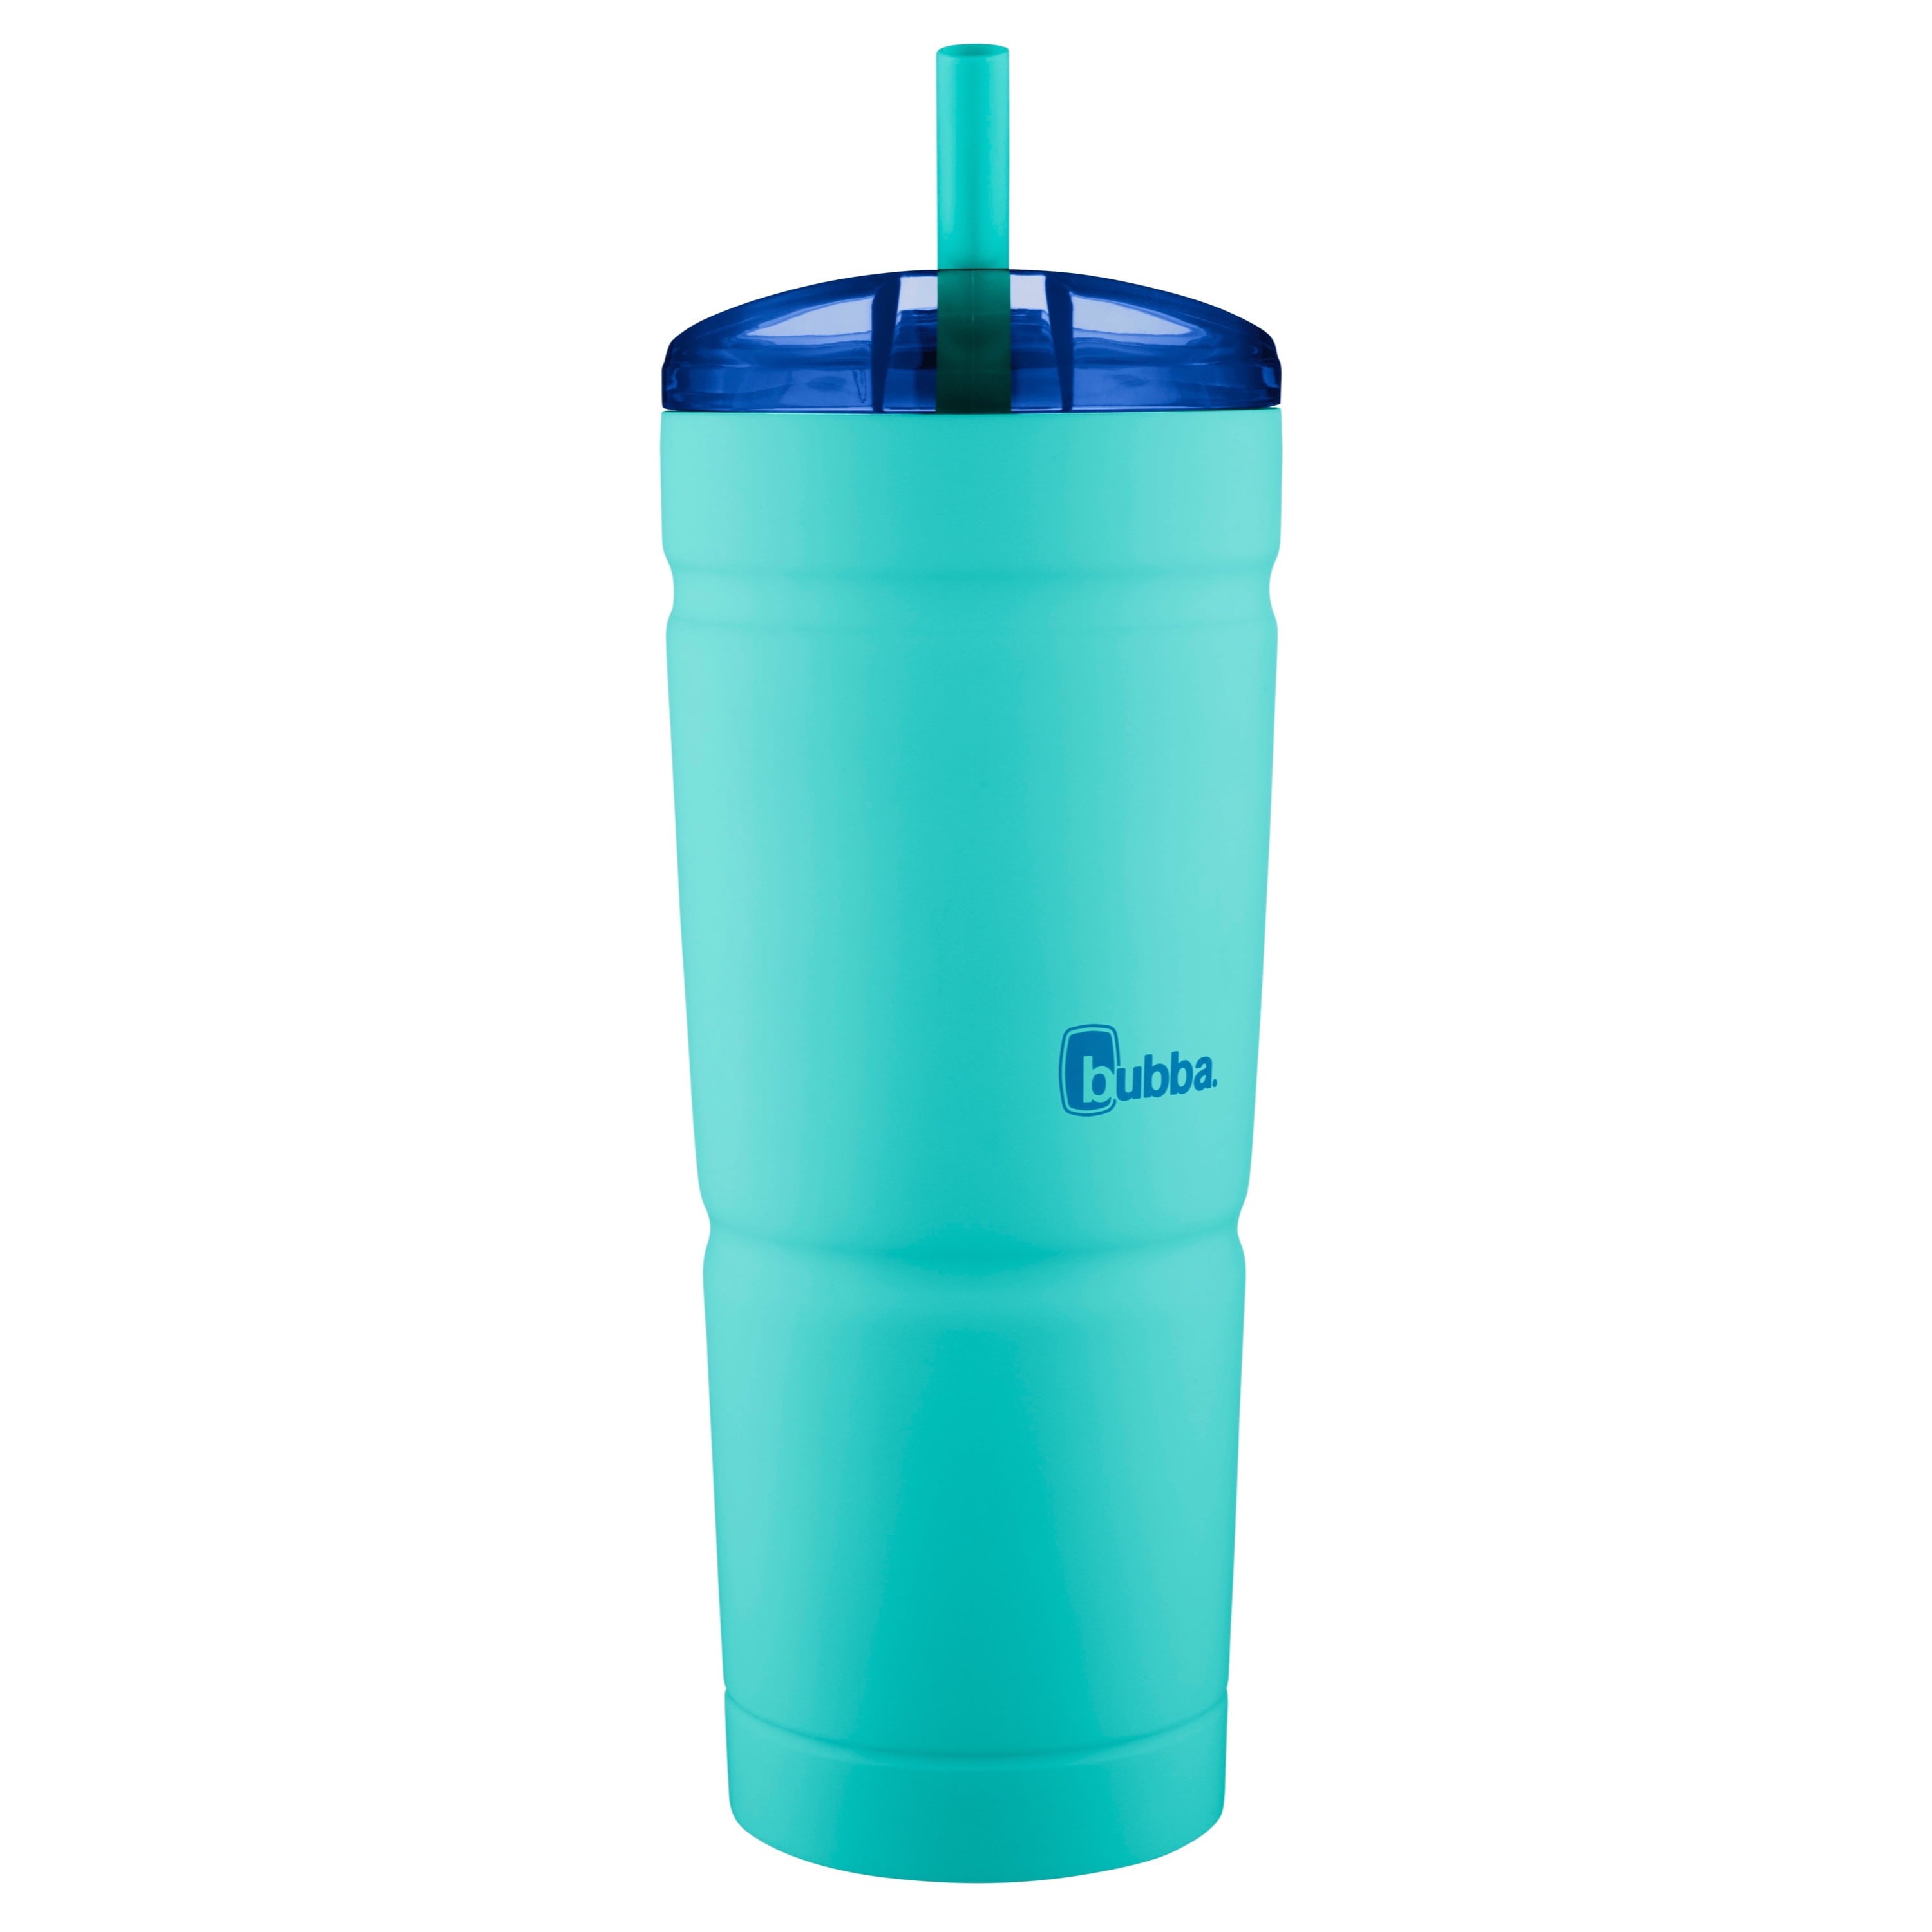 bubba Envy S Stainless Steel Tumbler with Straw Island Teal, 24 fl oz. 